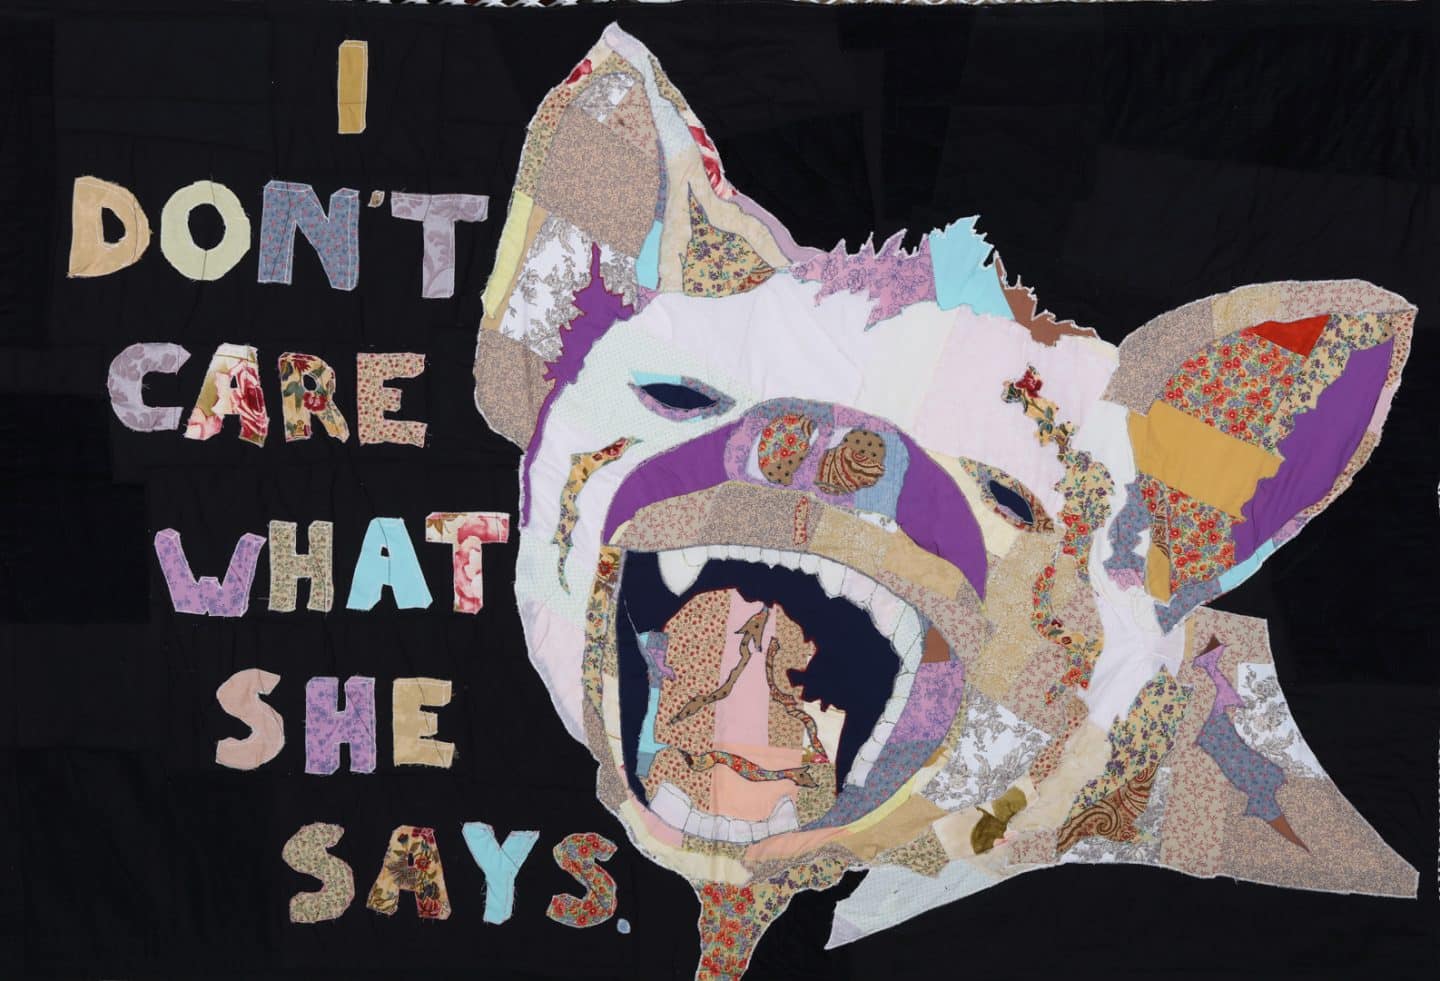 Lisa Visser, Hyena One, 2009, quilted and appliqué cotton fabric. Gift of friends and family of Lisa Visser, 2016